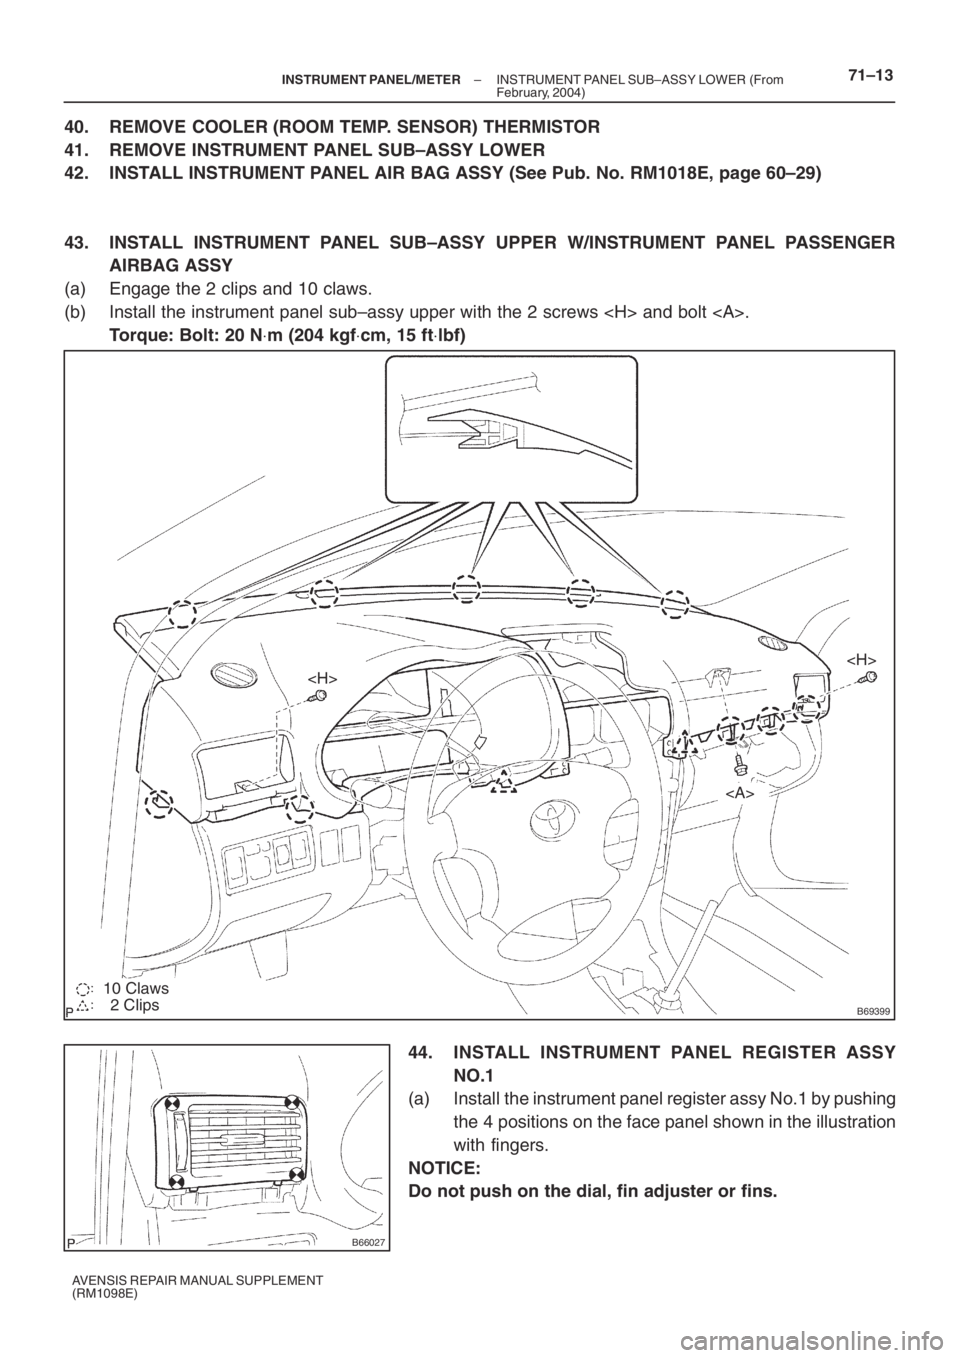 TOYOTA AVENSIS 2005  Service Repair Manual B69399
<H>
<H>
<A>
10 Claws
2 Clips
B66027
– INSTRUMENT PANEL/METERINSTRUMENT PANEL SUB–ASSY LOWER (From
February, 2004)71–13
AVENSIS REPAIR MANUAL SUPPLEMENT
(RM1098E)
40. REMOVE COOLER (ROOM T